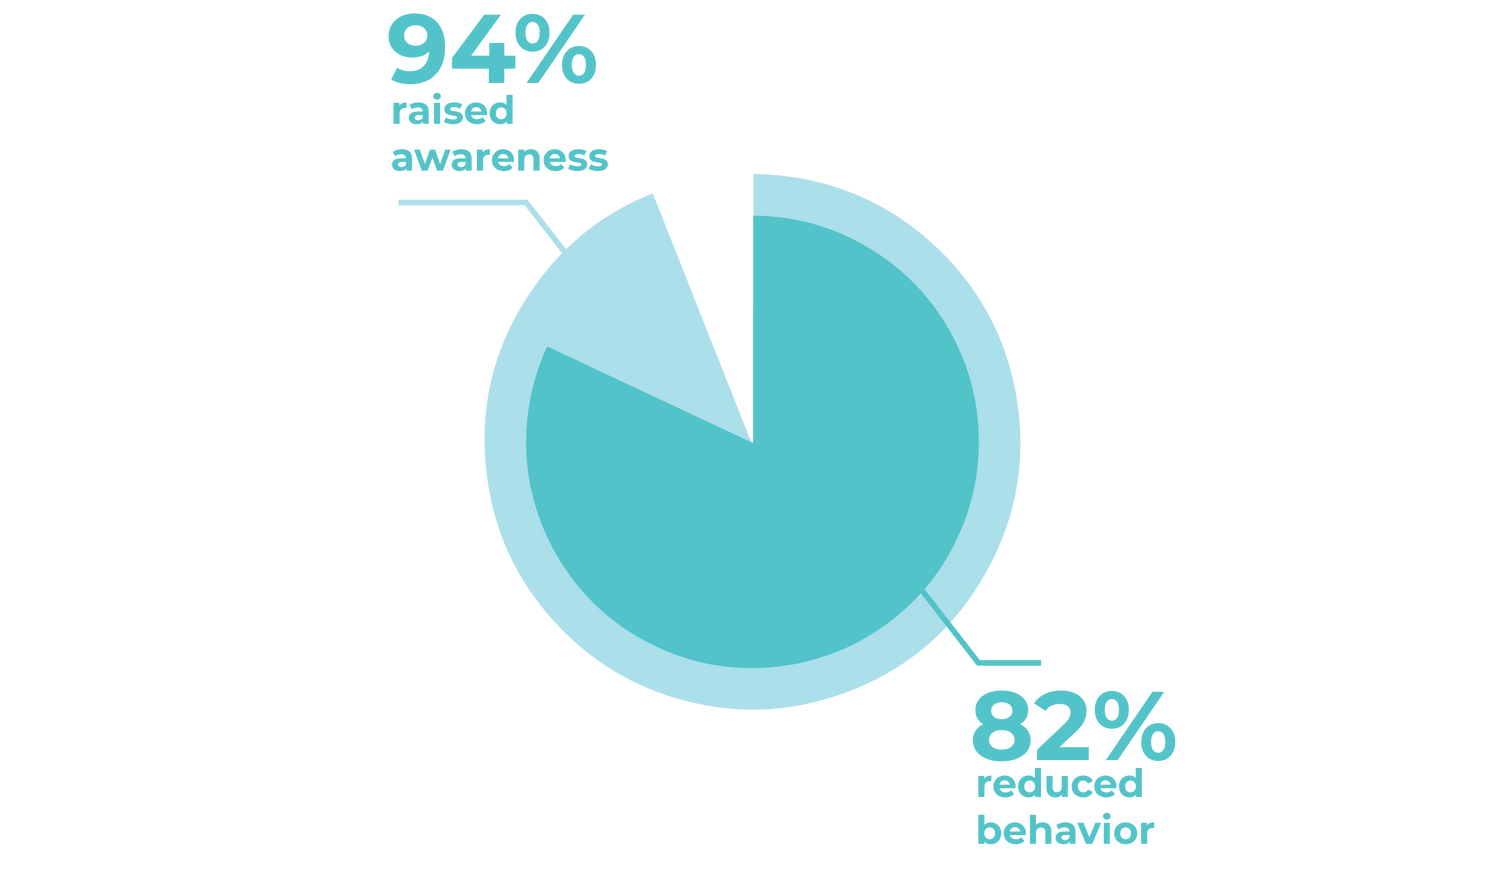 A pie chart showing the percentage of remediated behavior.